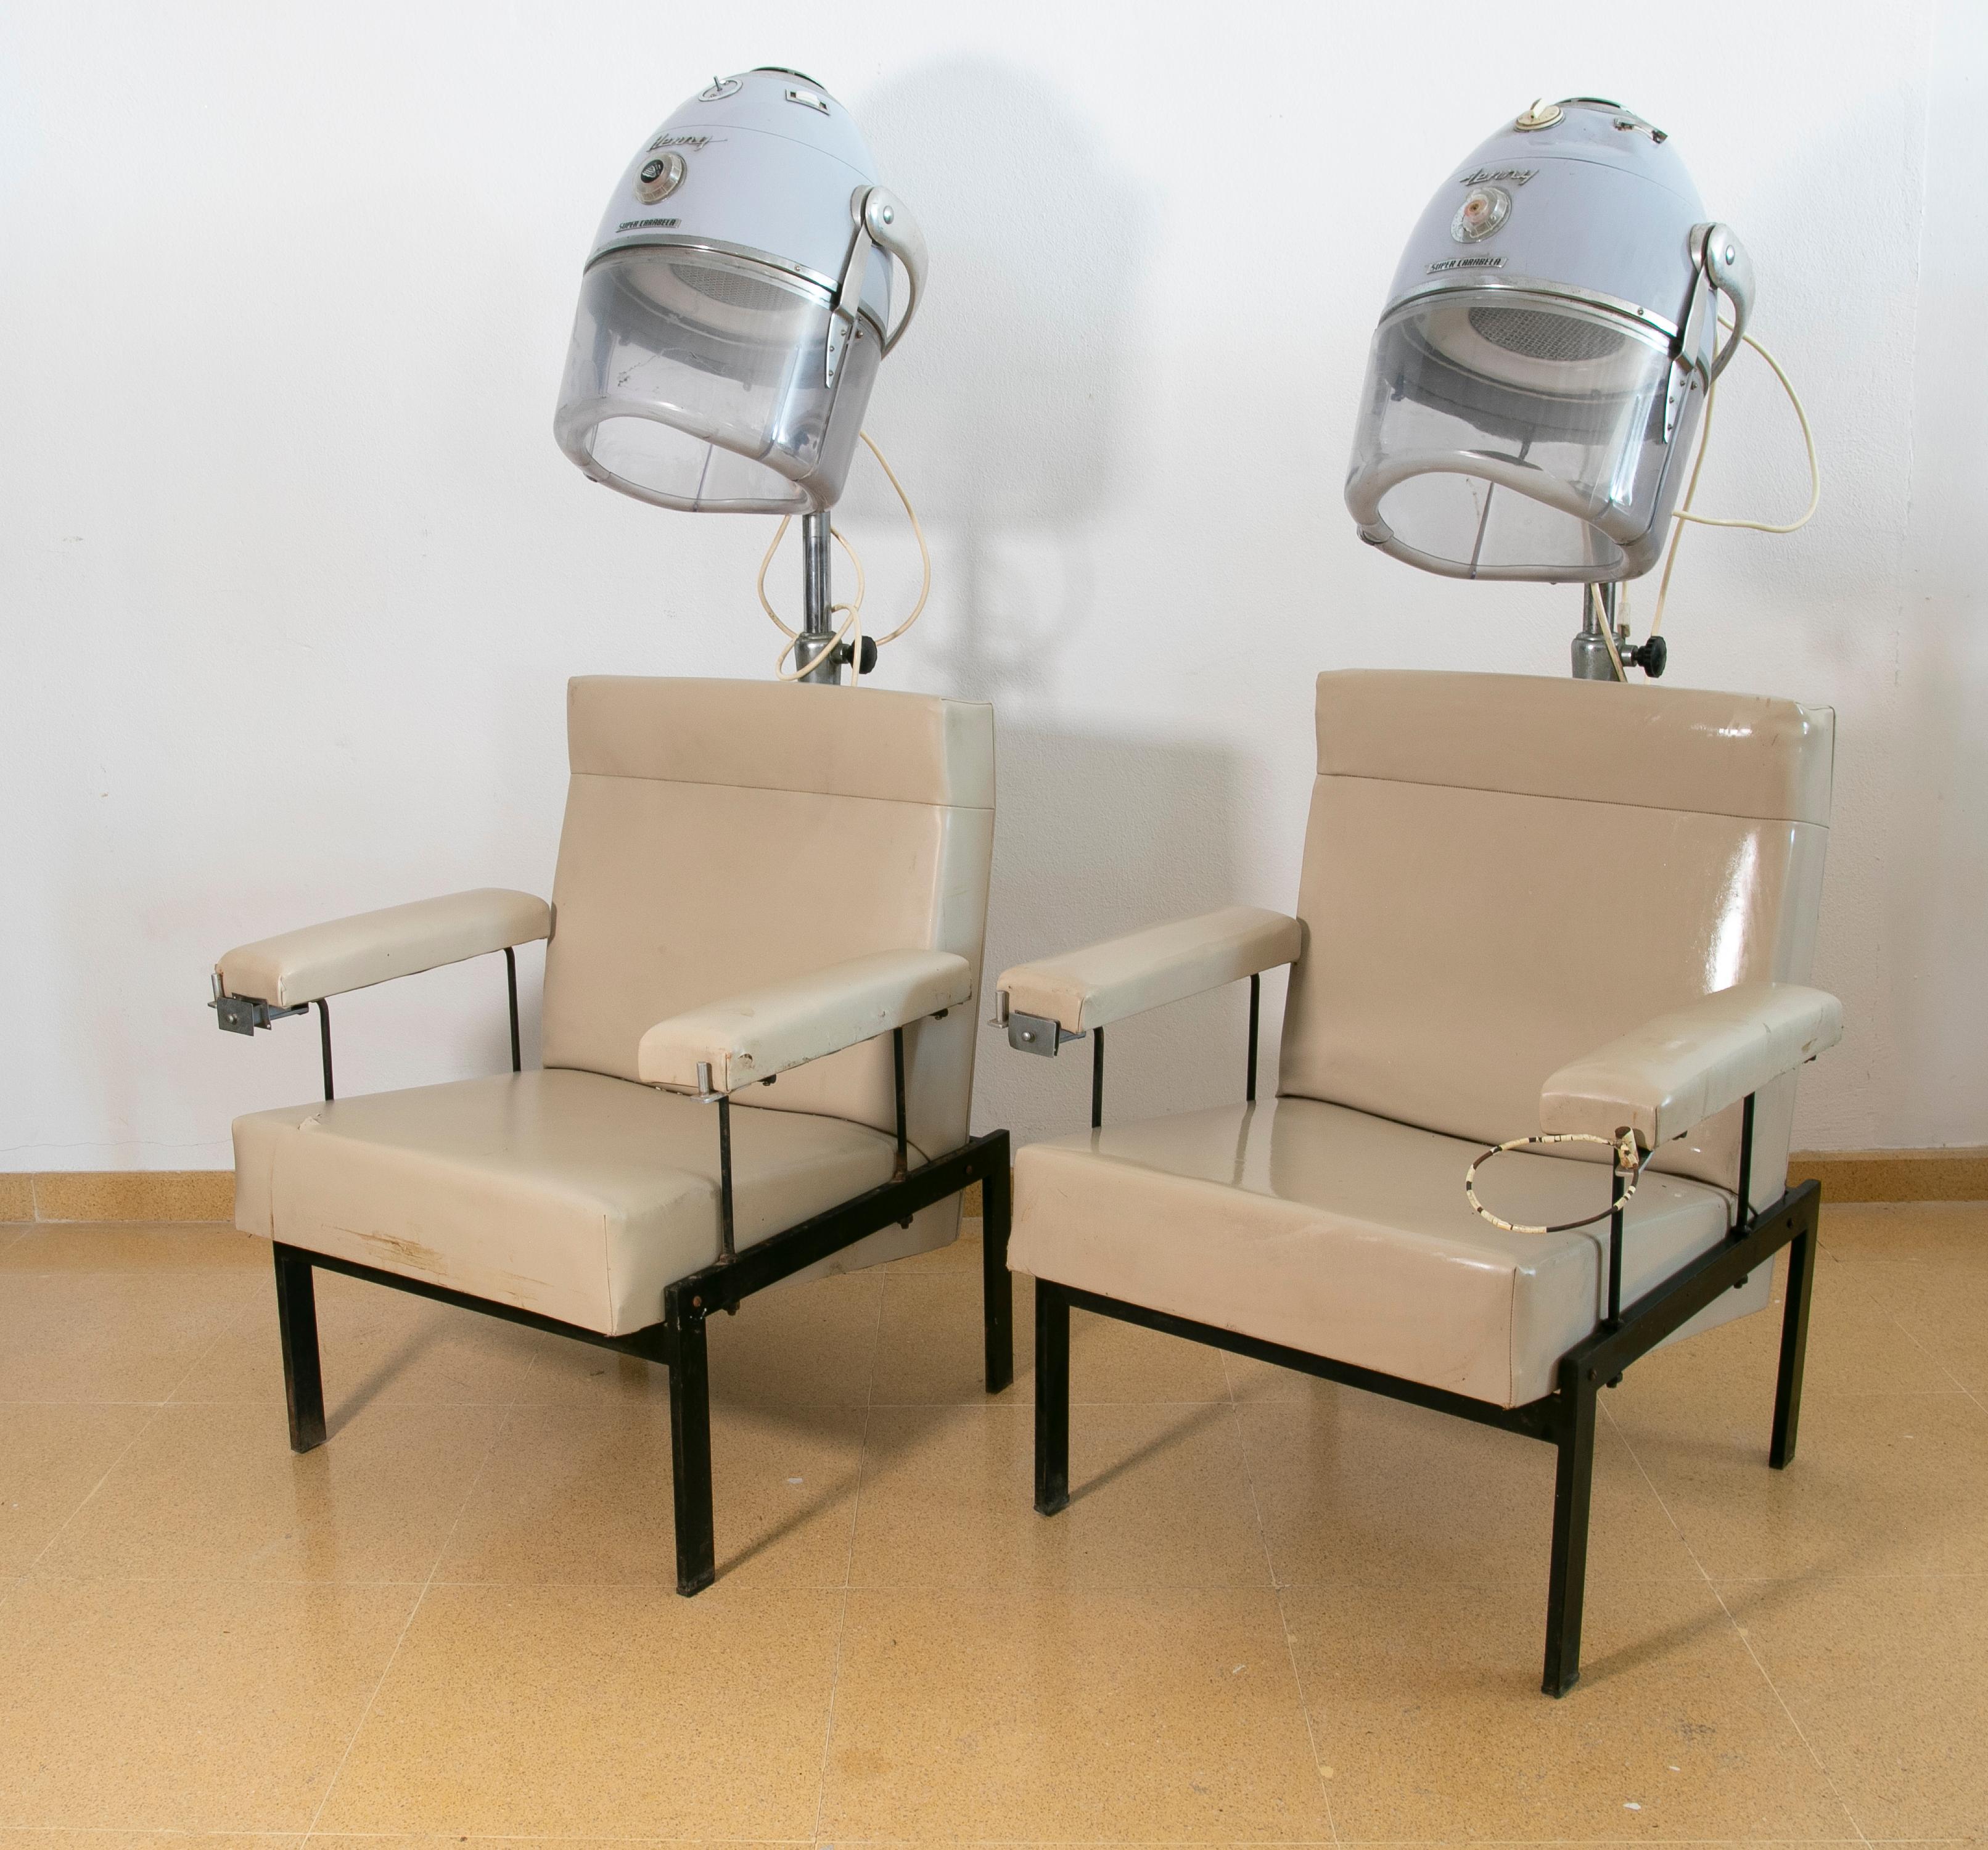 Pair of Ladies hairdressing chairs with Original Machine, Henry Colomer brand. Numbered.